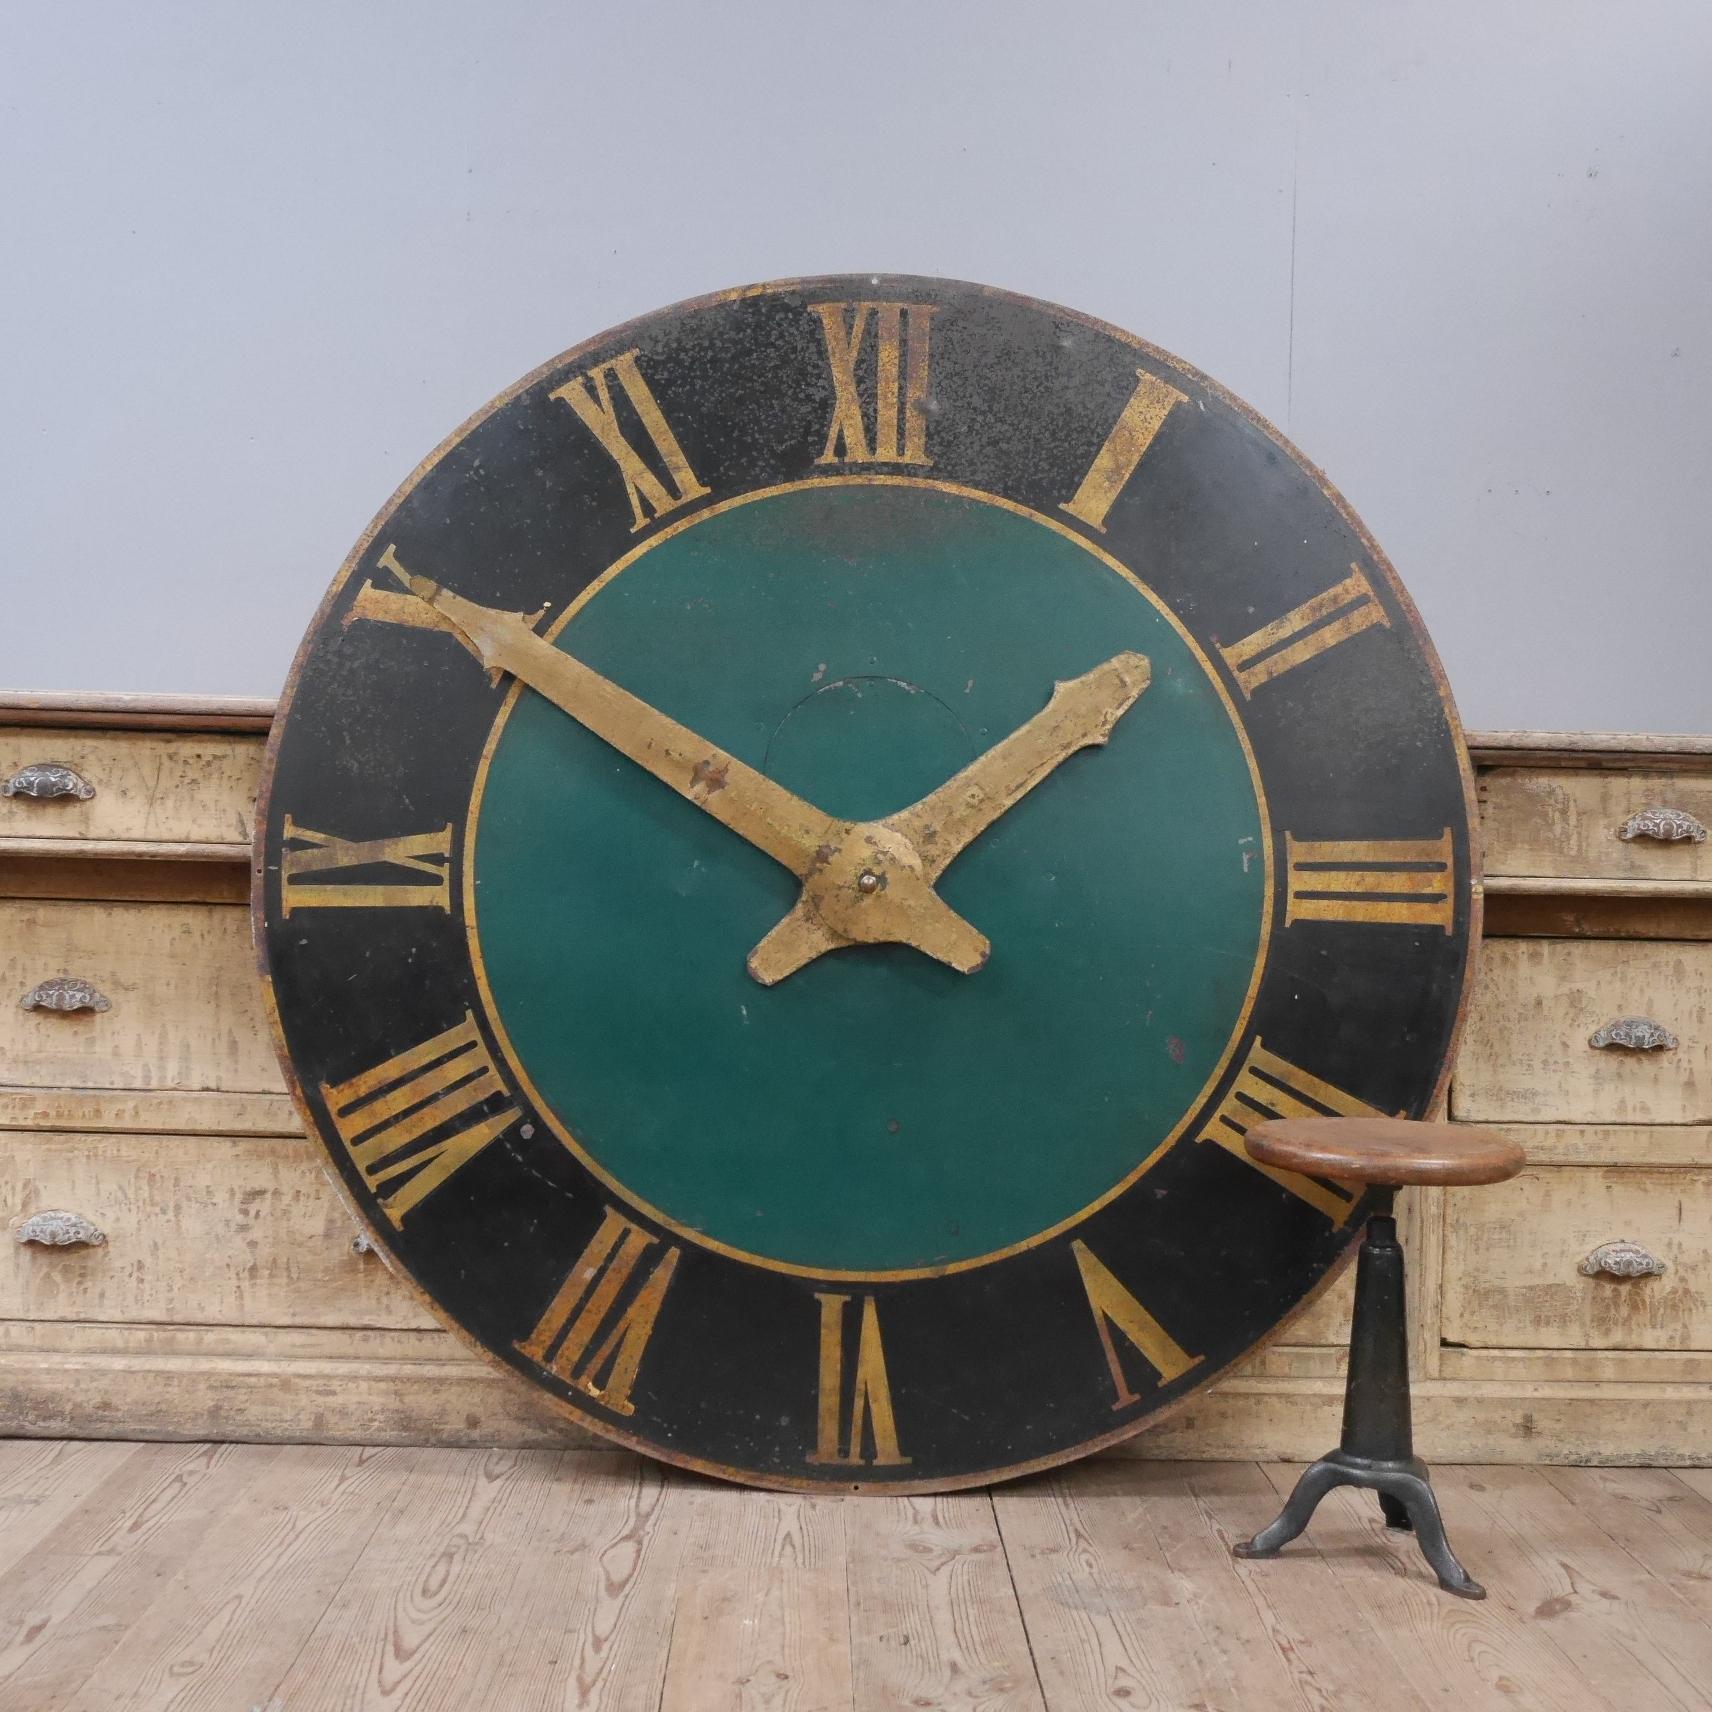 A huge reclaimed Parisian tower clock face.
An exceptional & highly unusual example of great scale, in the original painted & gilded finish with just the right amount of wear. With a riveted ex-service hatch to the centre & retaining it's original